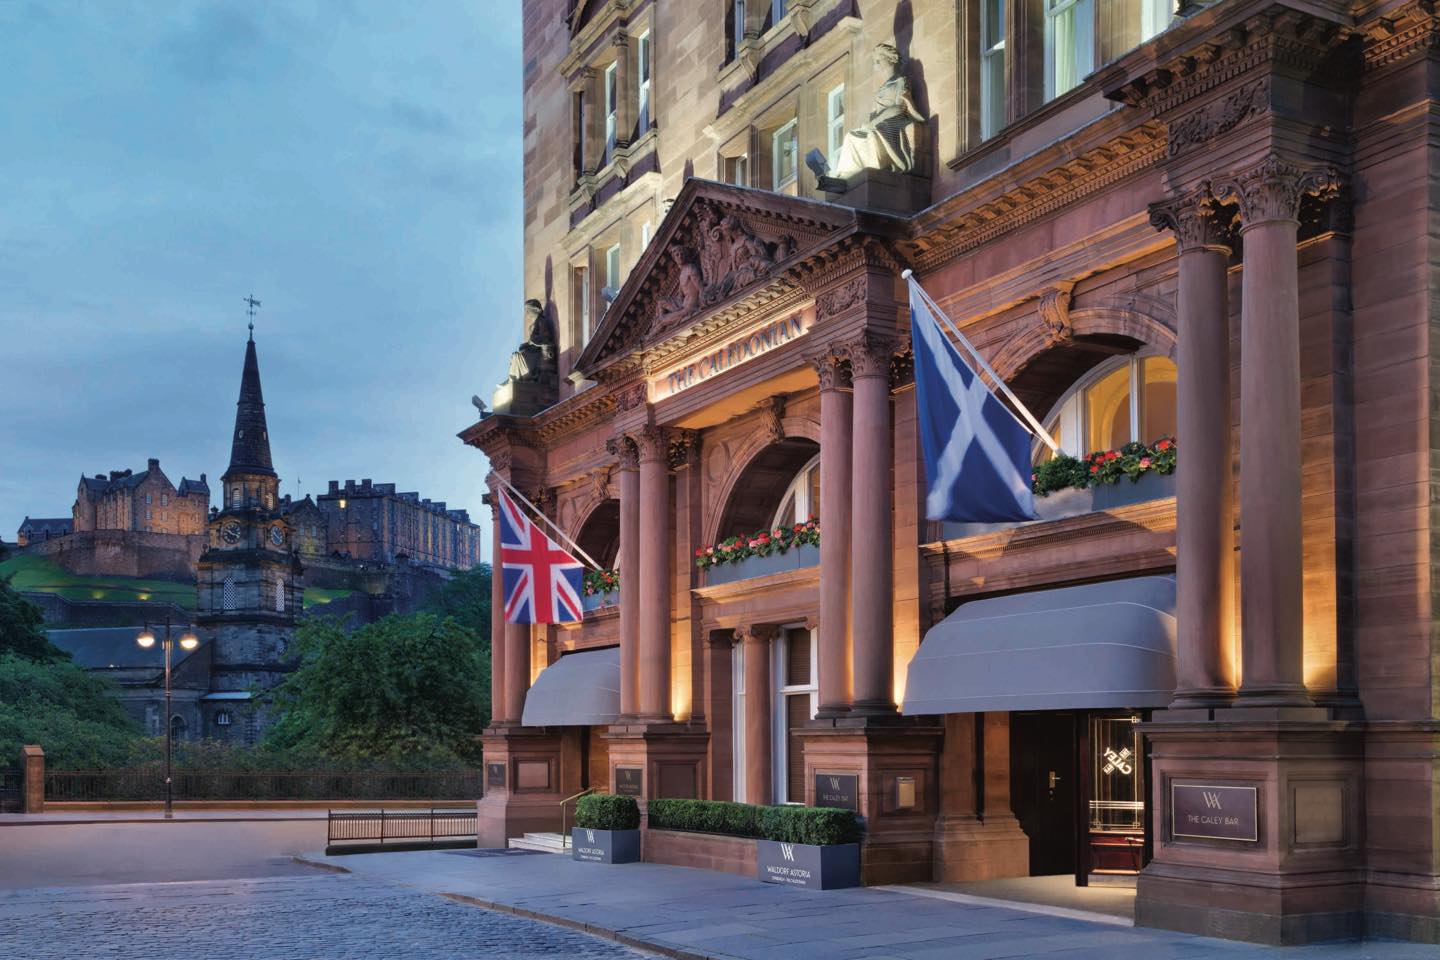 Luxury: The hotel has closed its doors. <strong>Waldorf Astoria Edinburgh – The Caledonian</strong>”/><cite class=cite></cite></div><figcaption aria-hidden=true>Luxury: The hotel has closed its doors. <strong>Waldorf Astoria Edinburgh – The Caledonian</strong> <cite class=hidden></cite></figcaption></figure><p>In a statement posted on Facebook, the company said: “It is with heaviness of heart that we announce in response the UK Government’s guidelines, that we have temporarily suspended operation of our hotel until April 24th.</p><p>“This is certainly not a goodbye, our team will continue to plan for the rest of the year and are committed to fully restoring operation of our iconic hotel as soon as possible.”</p><p><strong>Flights from 11 airports to be grounded</strong></p><p>Flights from 11 airports across Scotland will be grounded this weekend amid the coronavirus pandemic.</p><p>On Thursday morning, <a href=https://news.stv.tv/scotland/flights-from-11-airports-to-be-grounded-this-weekend>Highlands and Islands Airports Limited (Hial) confirmed</a> it would remain open for lifeline and essential services, however bosses were forced to make the “difficult, but necessary, decision” to close its airports to scheduled flights and routine aviation traffic with effect from Sunday.</p><p>Hial – which is owned by the Scottish Government – operates and manages Barra, Benbecula, Campbeltown, Dundee, Inverness, Islay, Kirkwall, Stornoway, Sumburgh, Tiree and Wick John O’ Groats airports.</p><figure class=